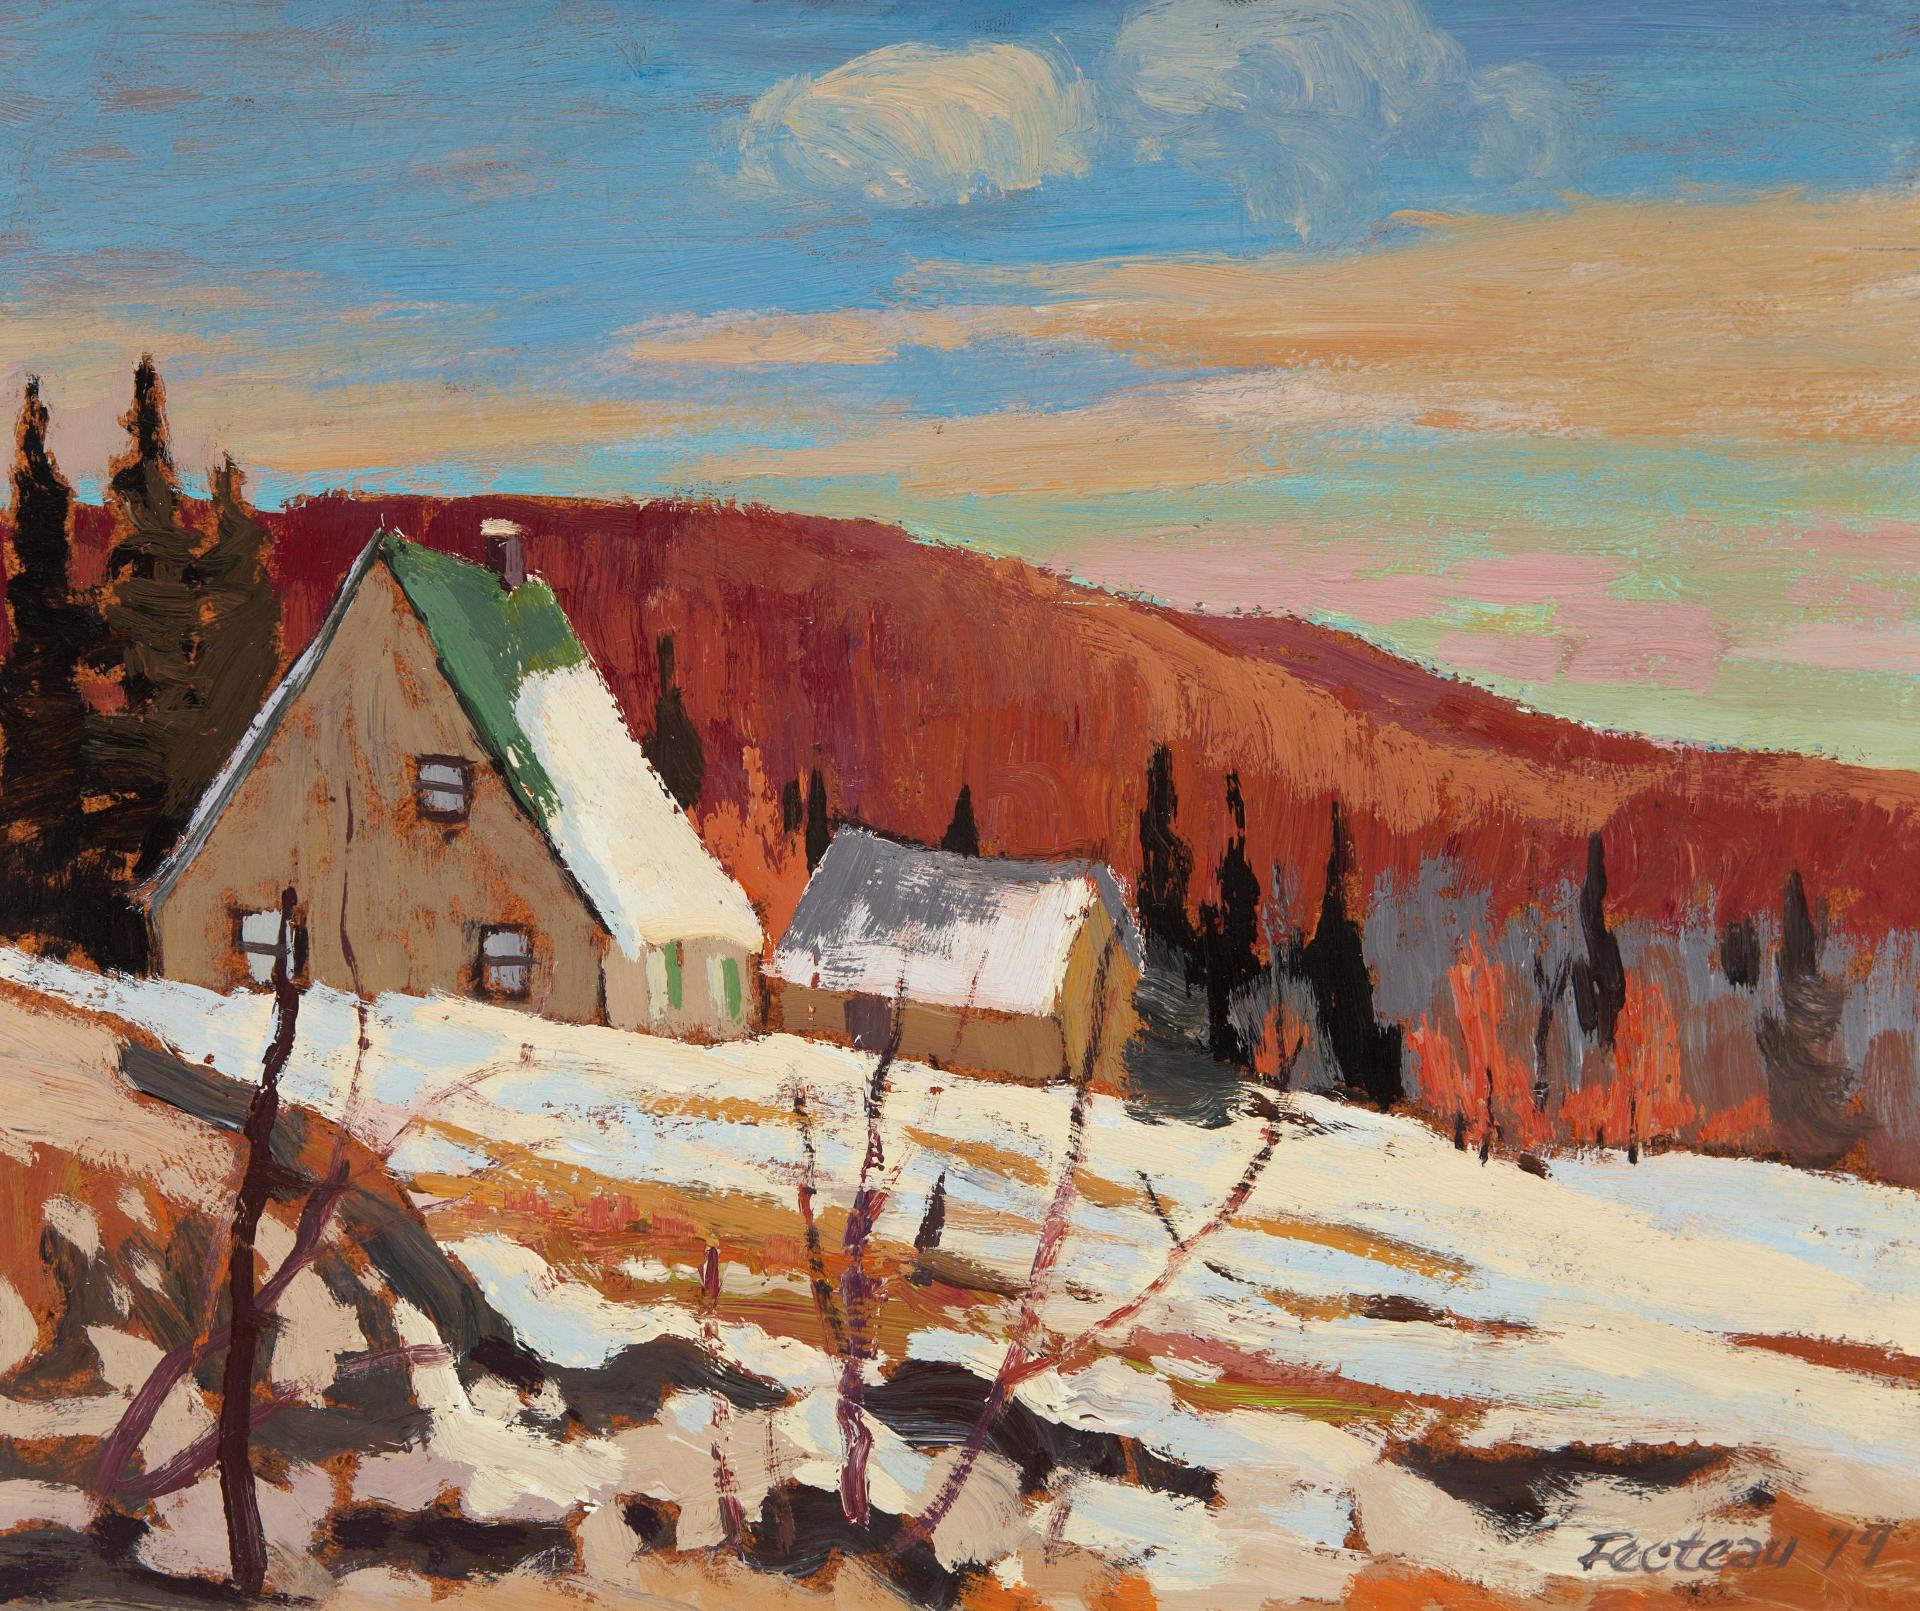 Marcel Fecteau (1927) - Winter scene and Country hill